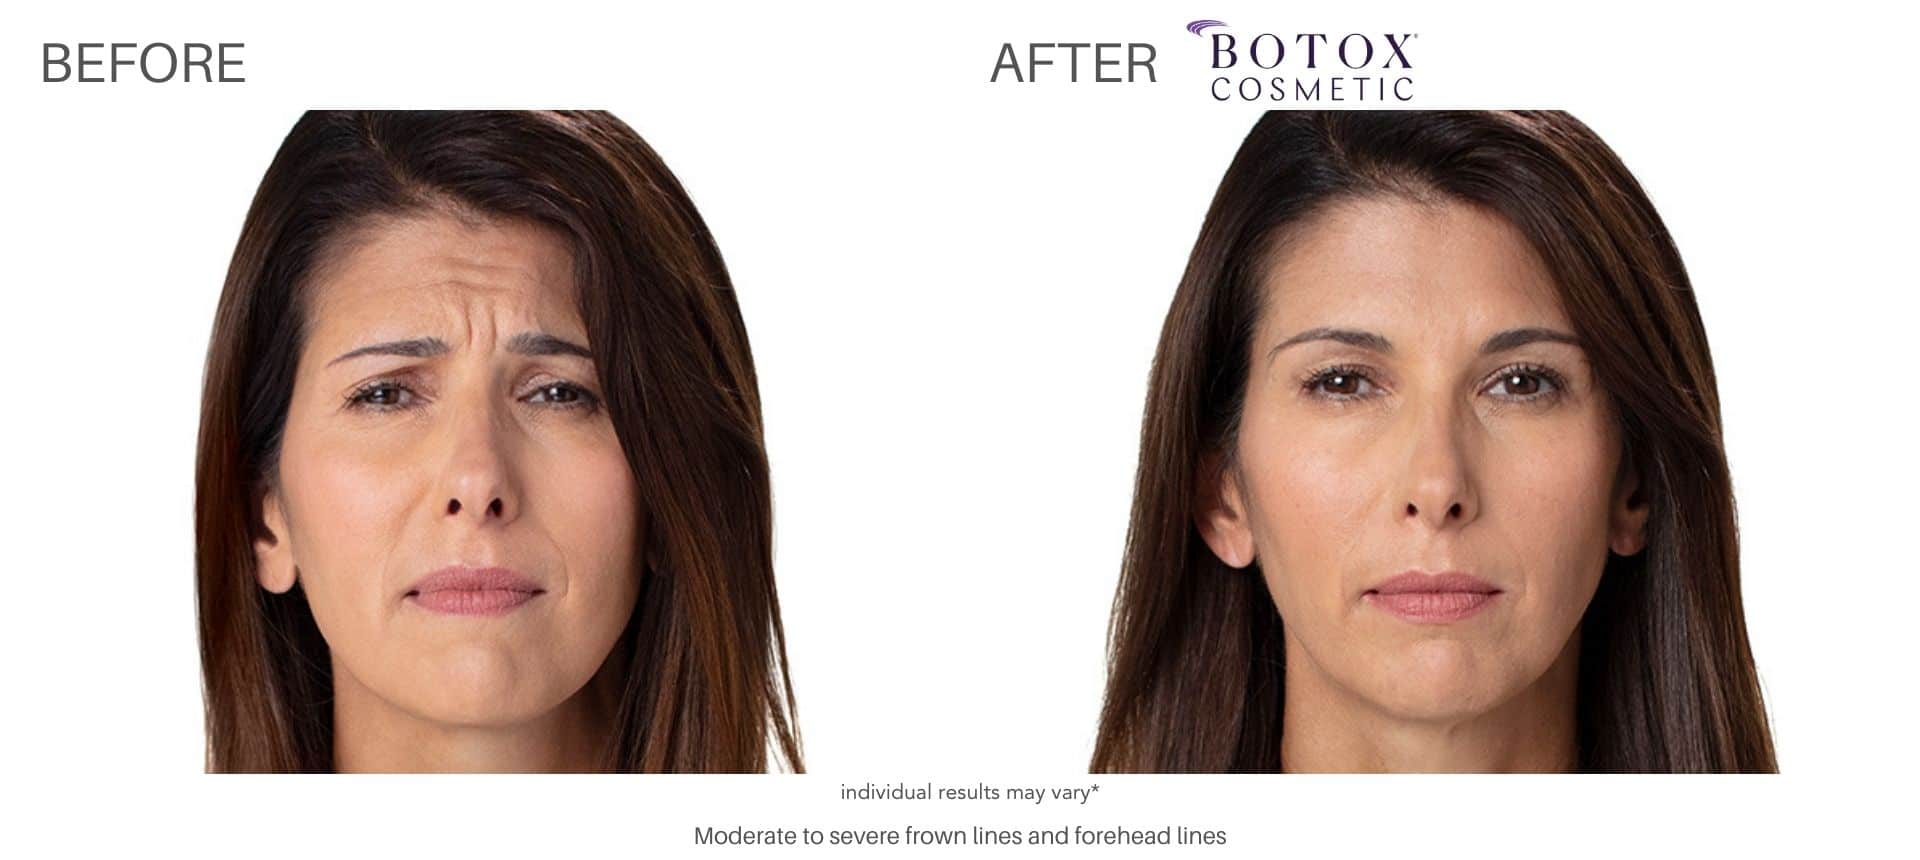 botox treatment in Purchase, NY at Advanced Rejuvenation Centers